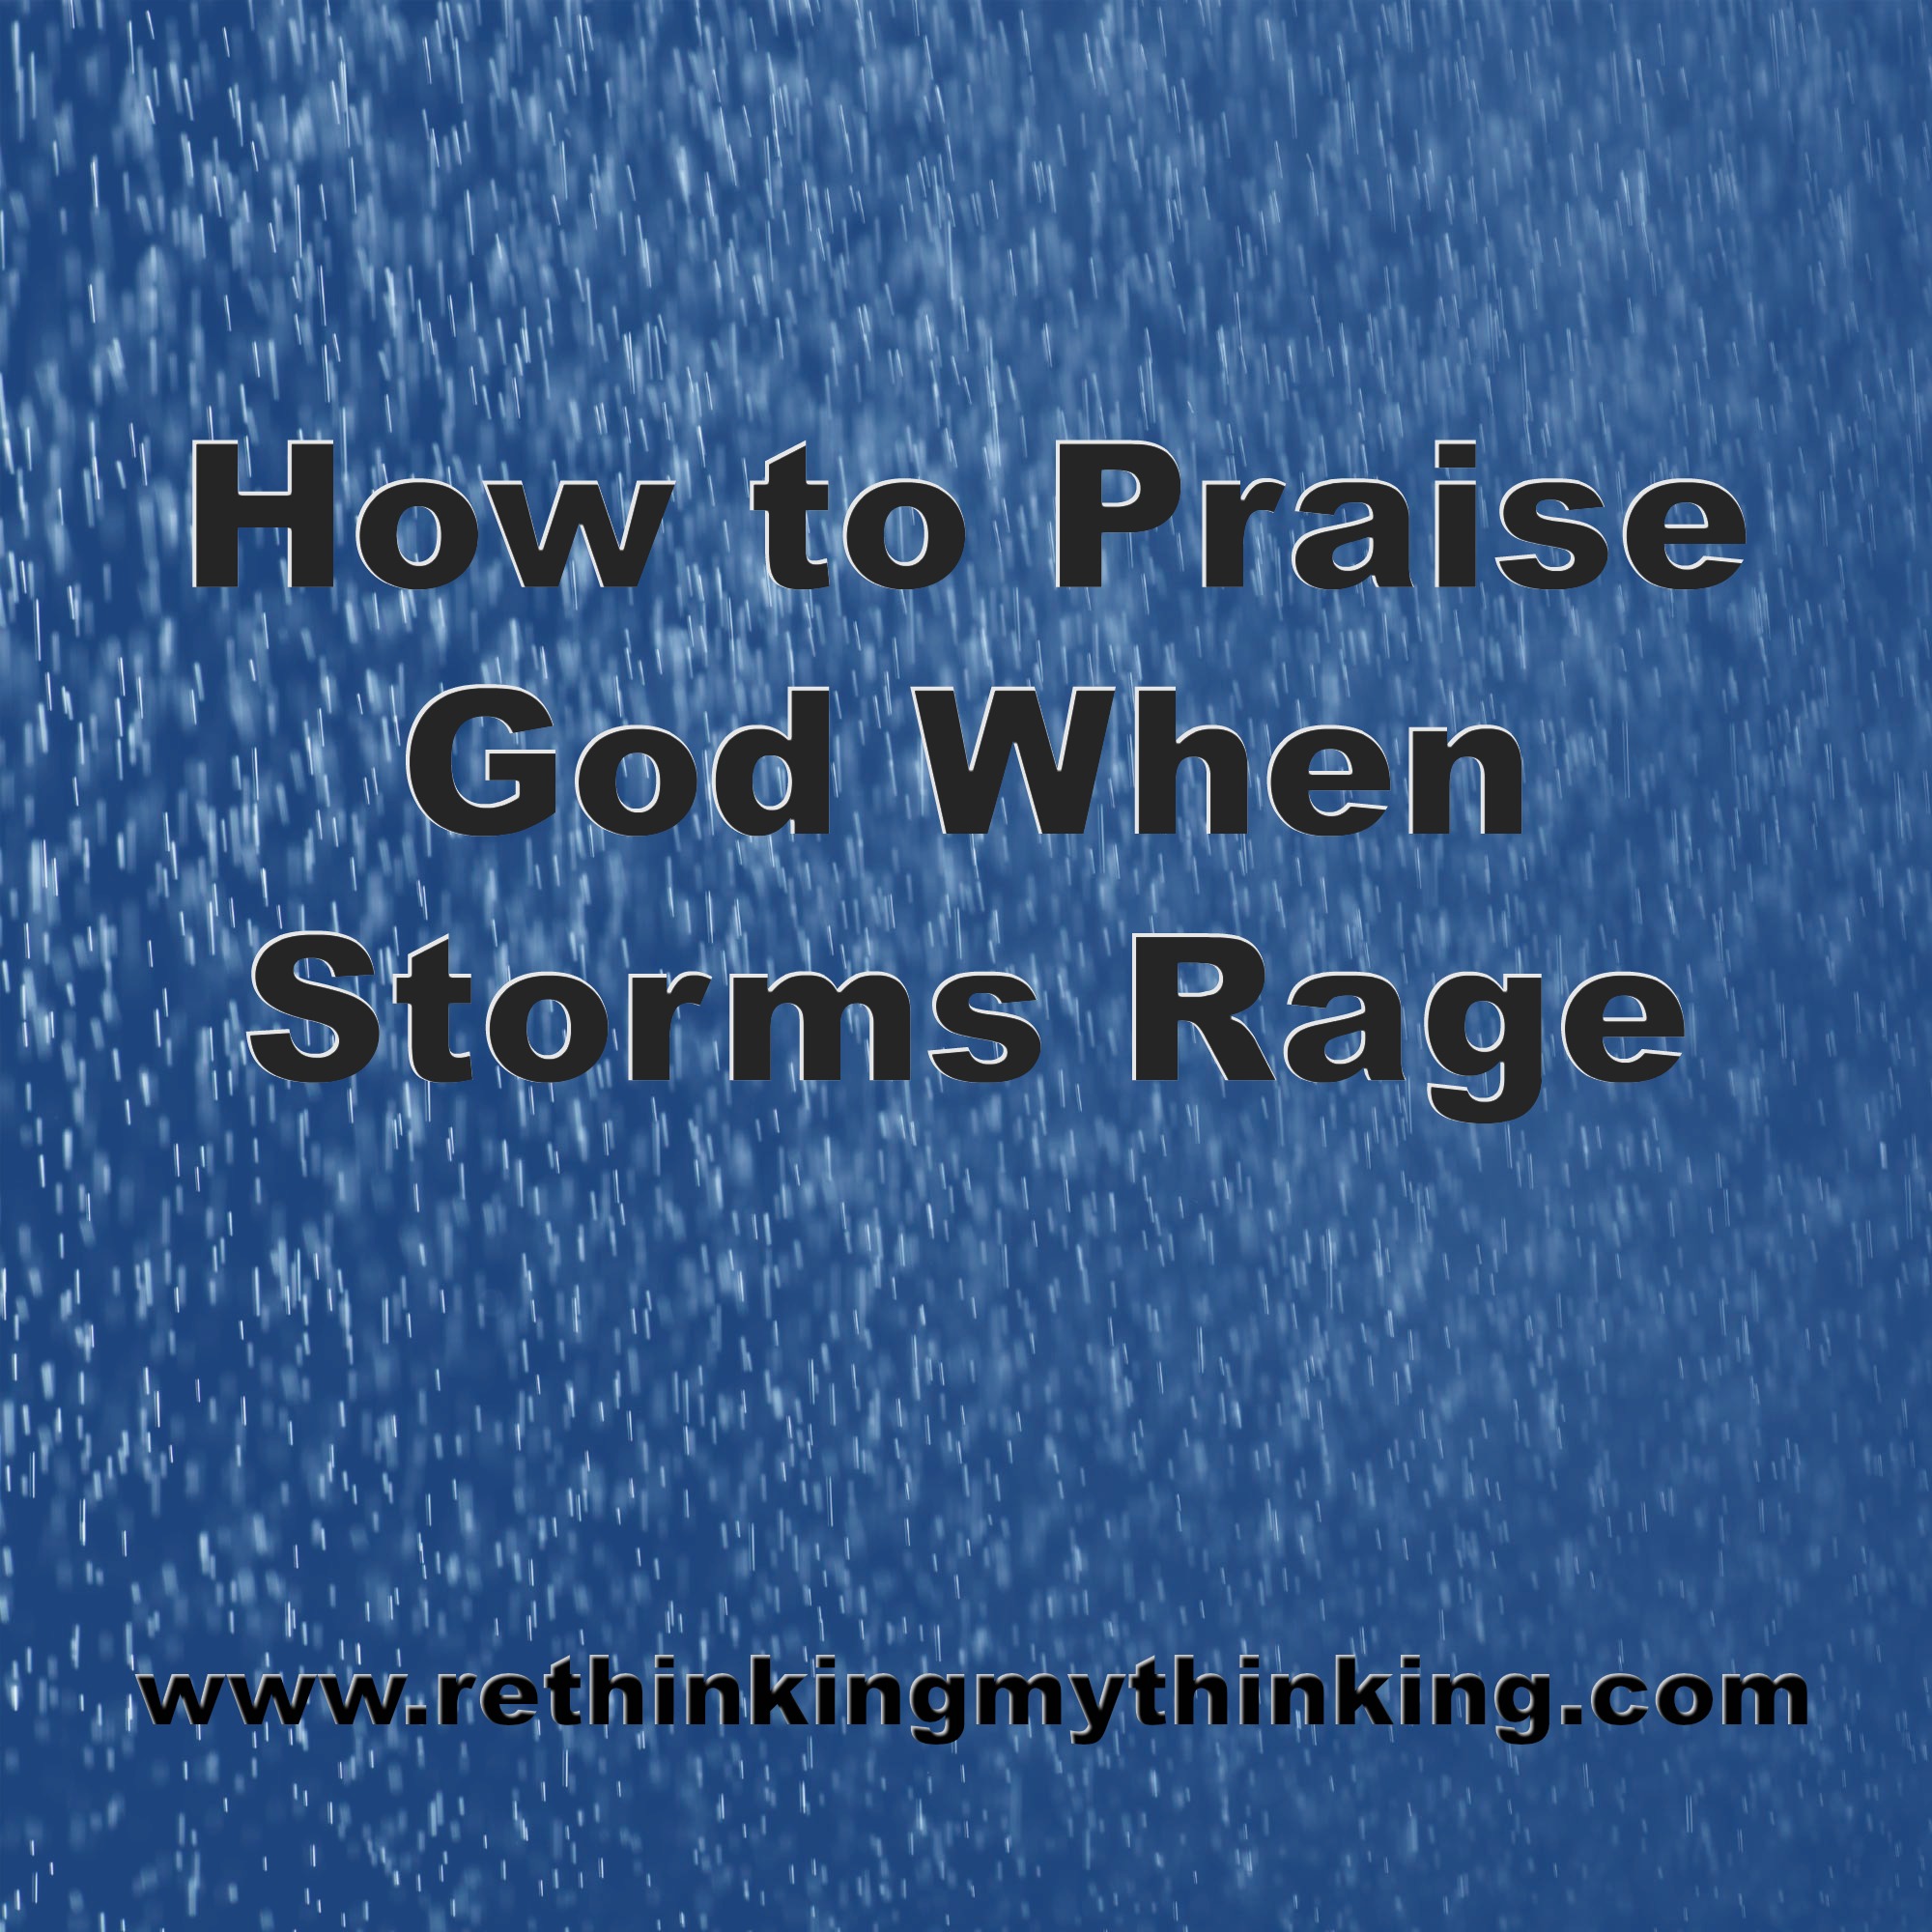 How to Praise God When Storms Rage